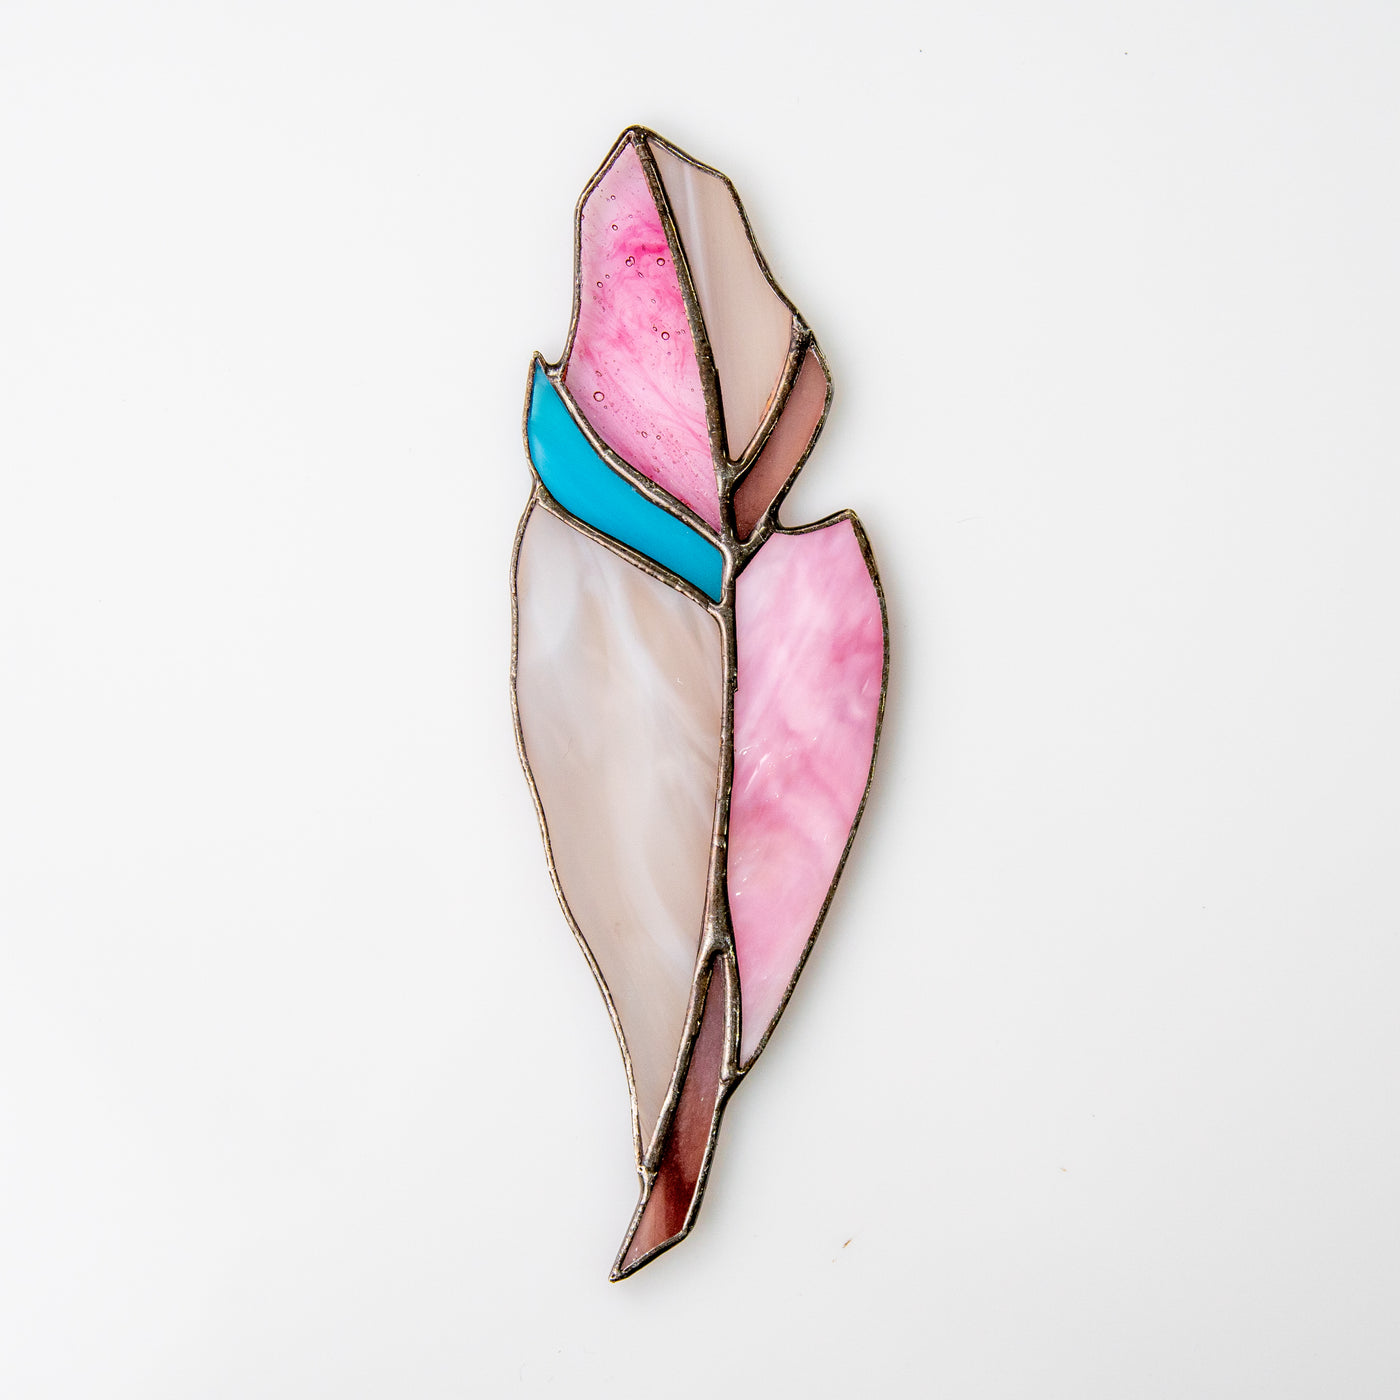 Suncatcher of a stained glass feather of pink colour with blue shade